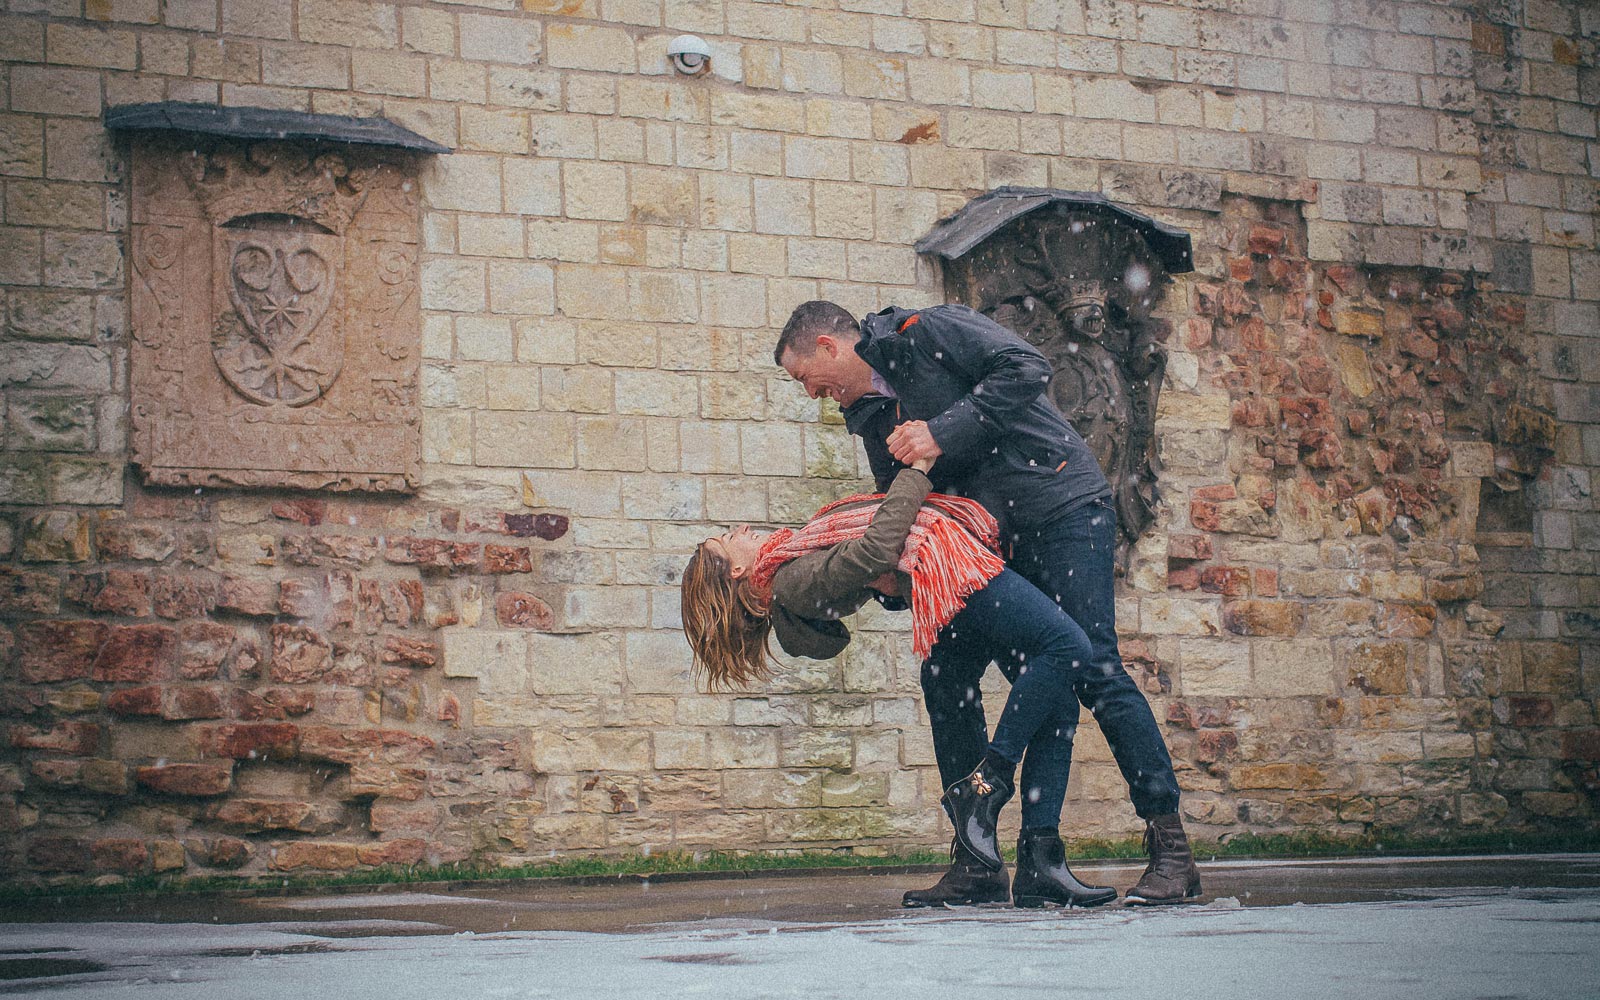 marriage proposal prague: N & J / photography session